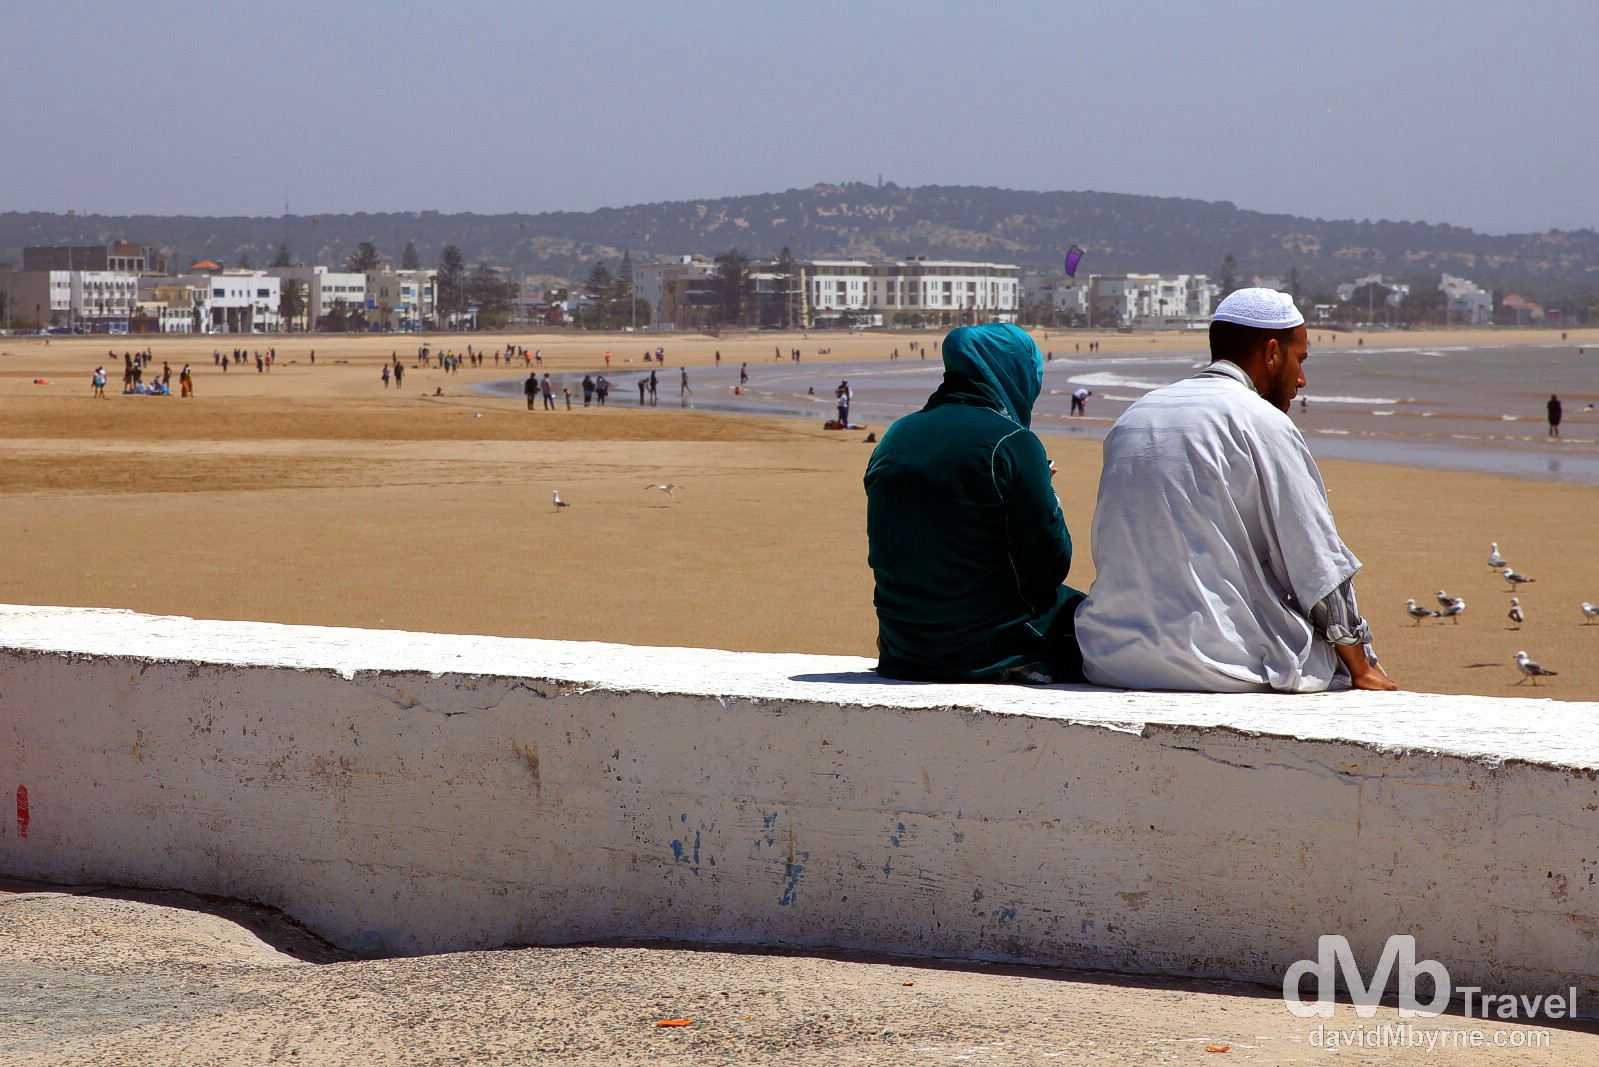 Overlooking the beach in Essaouira, Morocco. May 3rd, 2014.